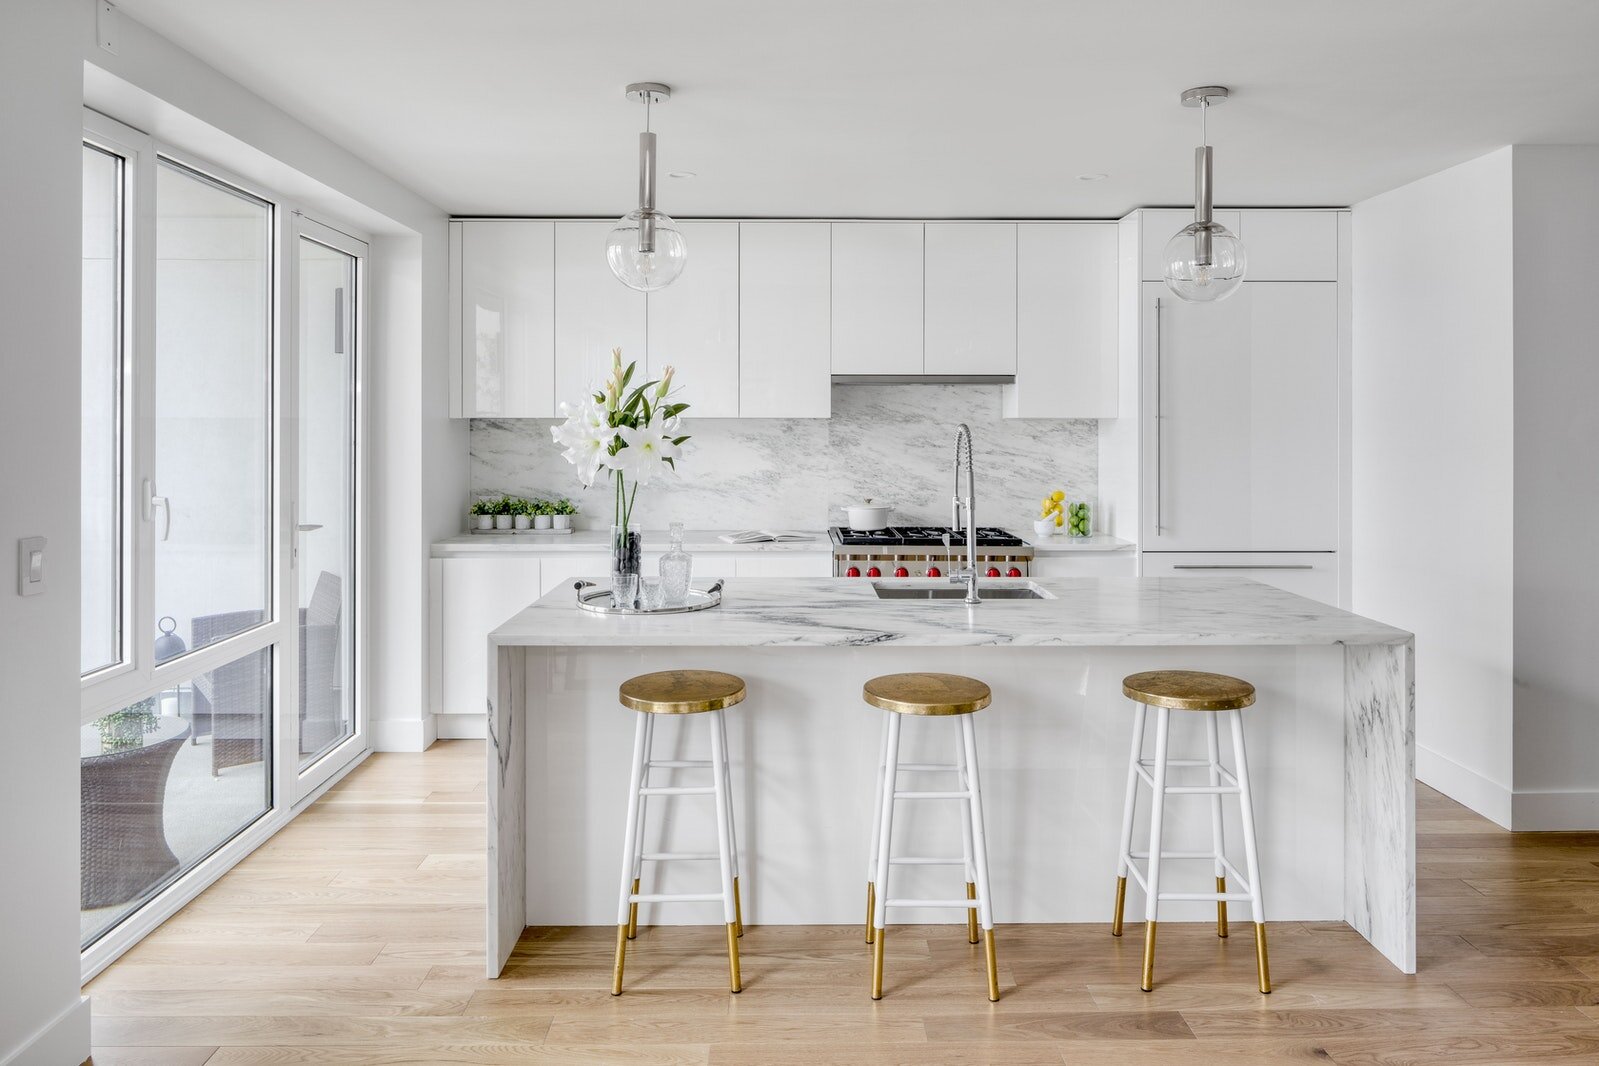   427 East 90th Street Apartment #PH9   The chef's kitchen is thoughtfully designed to offer everything you need for your culinary adventures. The open layout, featuring custom white lacquer cabinetry, honed Montclair Danby marble countertops and an 